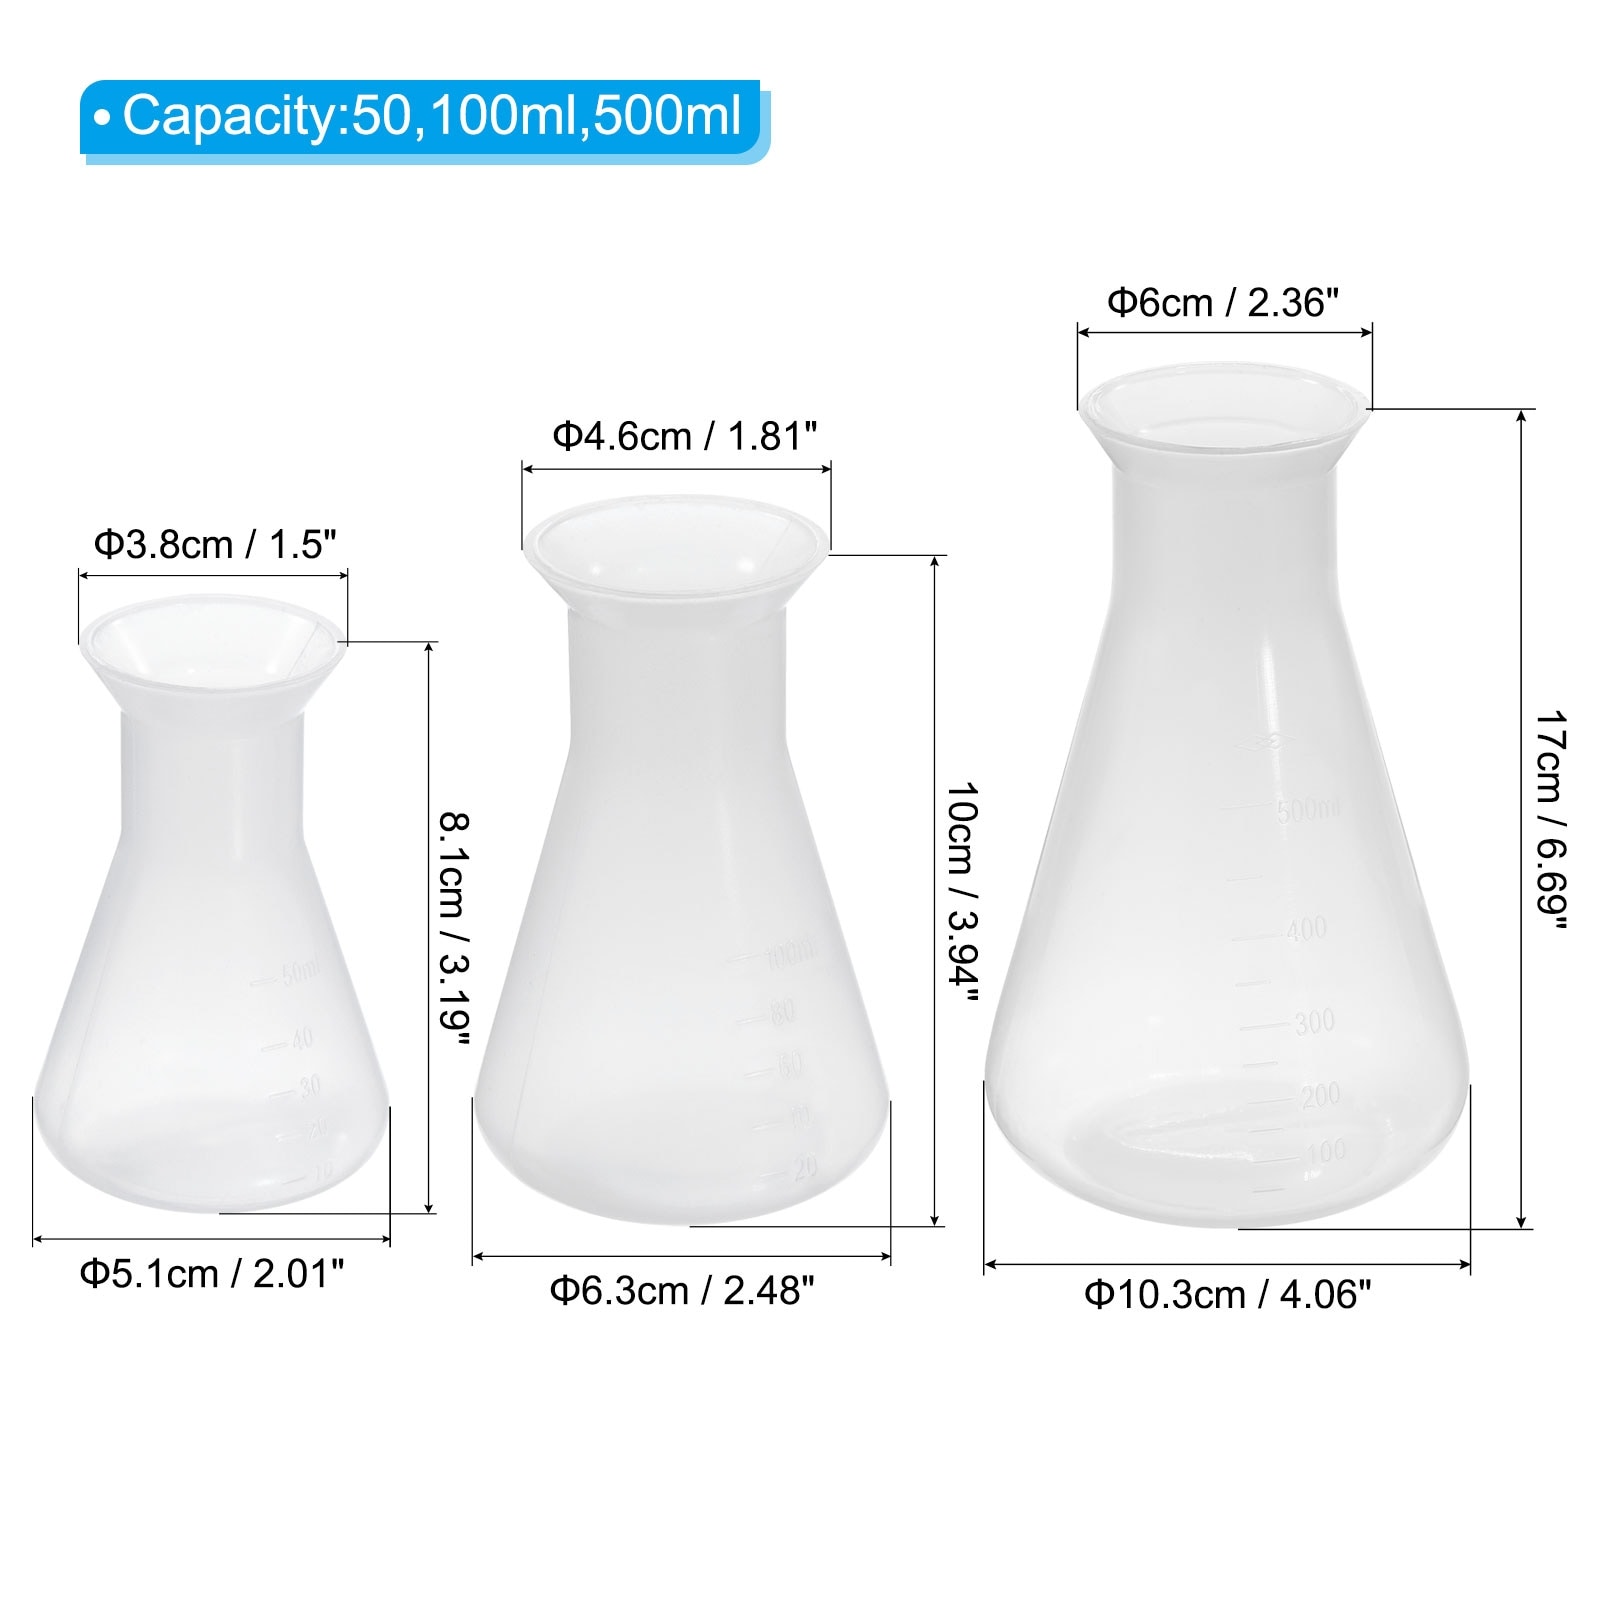 https://ak1.ostkcdn.com/images/products/is/images/direct/5b910f980703184e70677d492572503dd0663d45/Plastic-Erlenmeyer-Flask%2C-3-Pack-Wide-Mouth-Conical-Flask.jpg